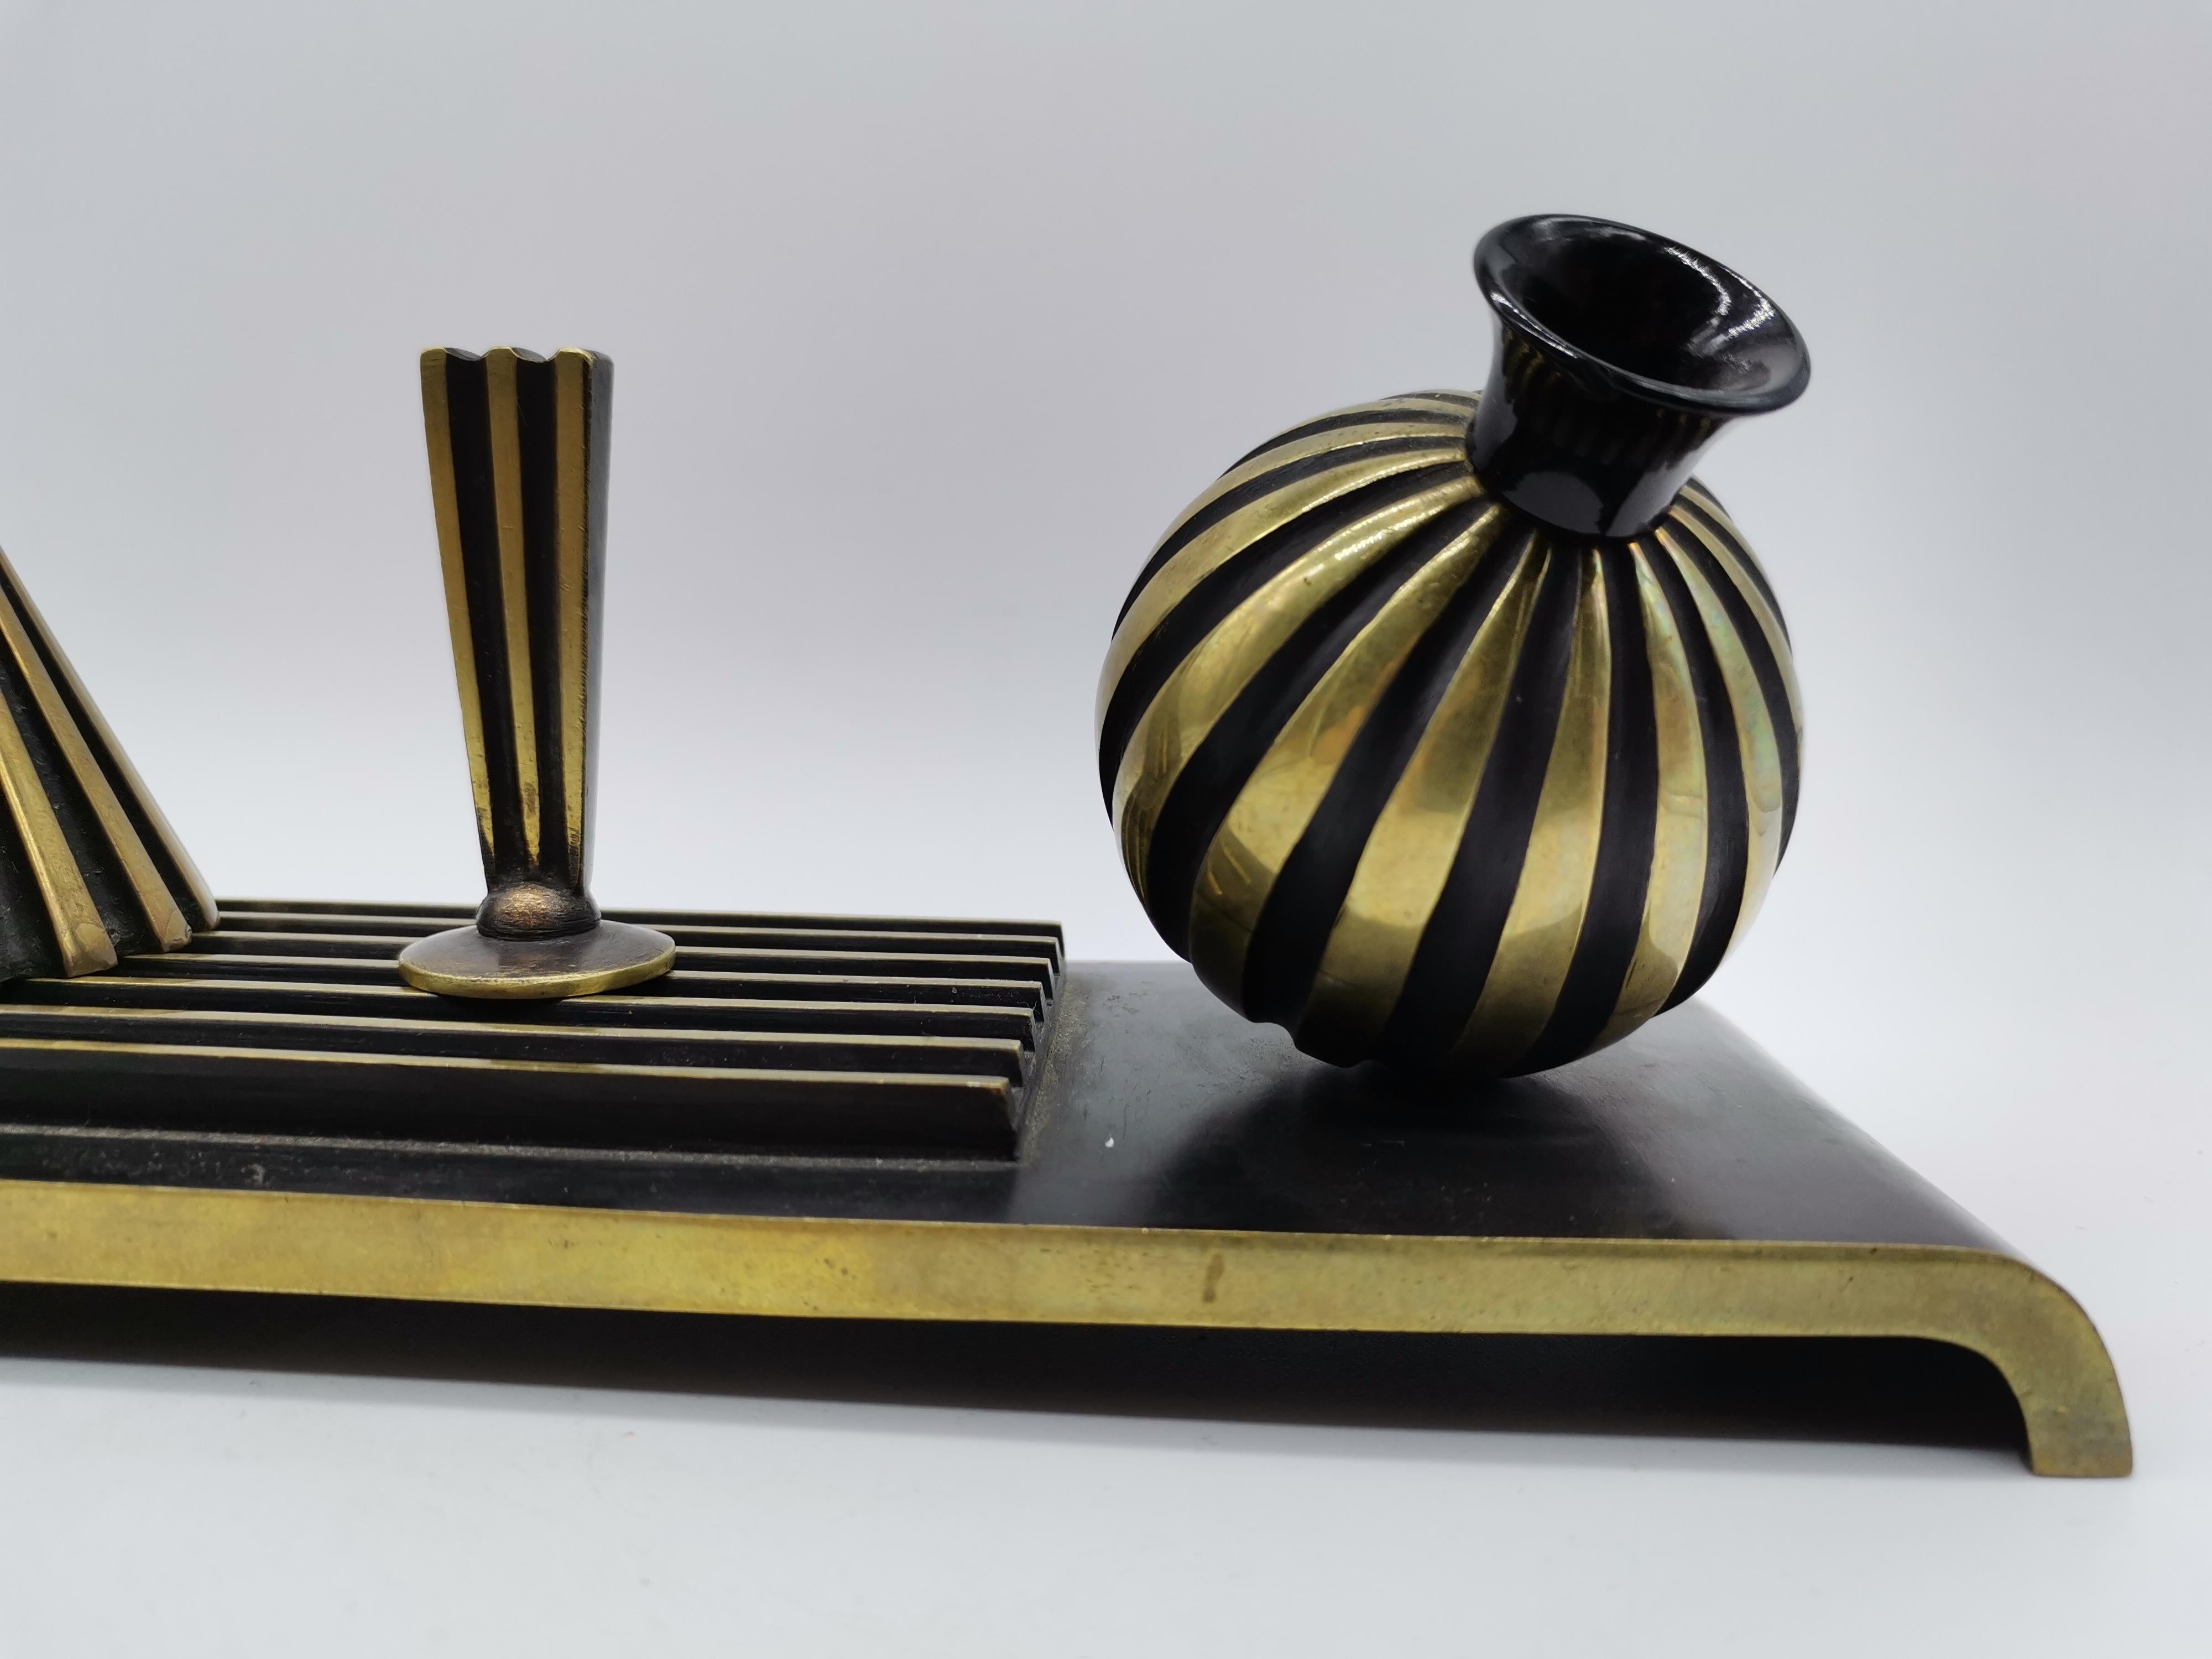 Three pieces of equipment for a reception. Bell, stamp, penholder. By Richard Rohac.